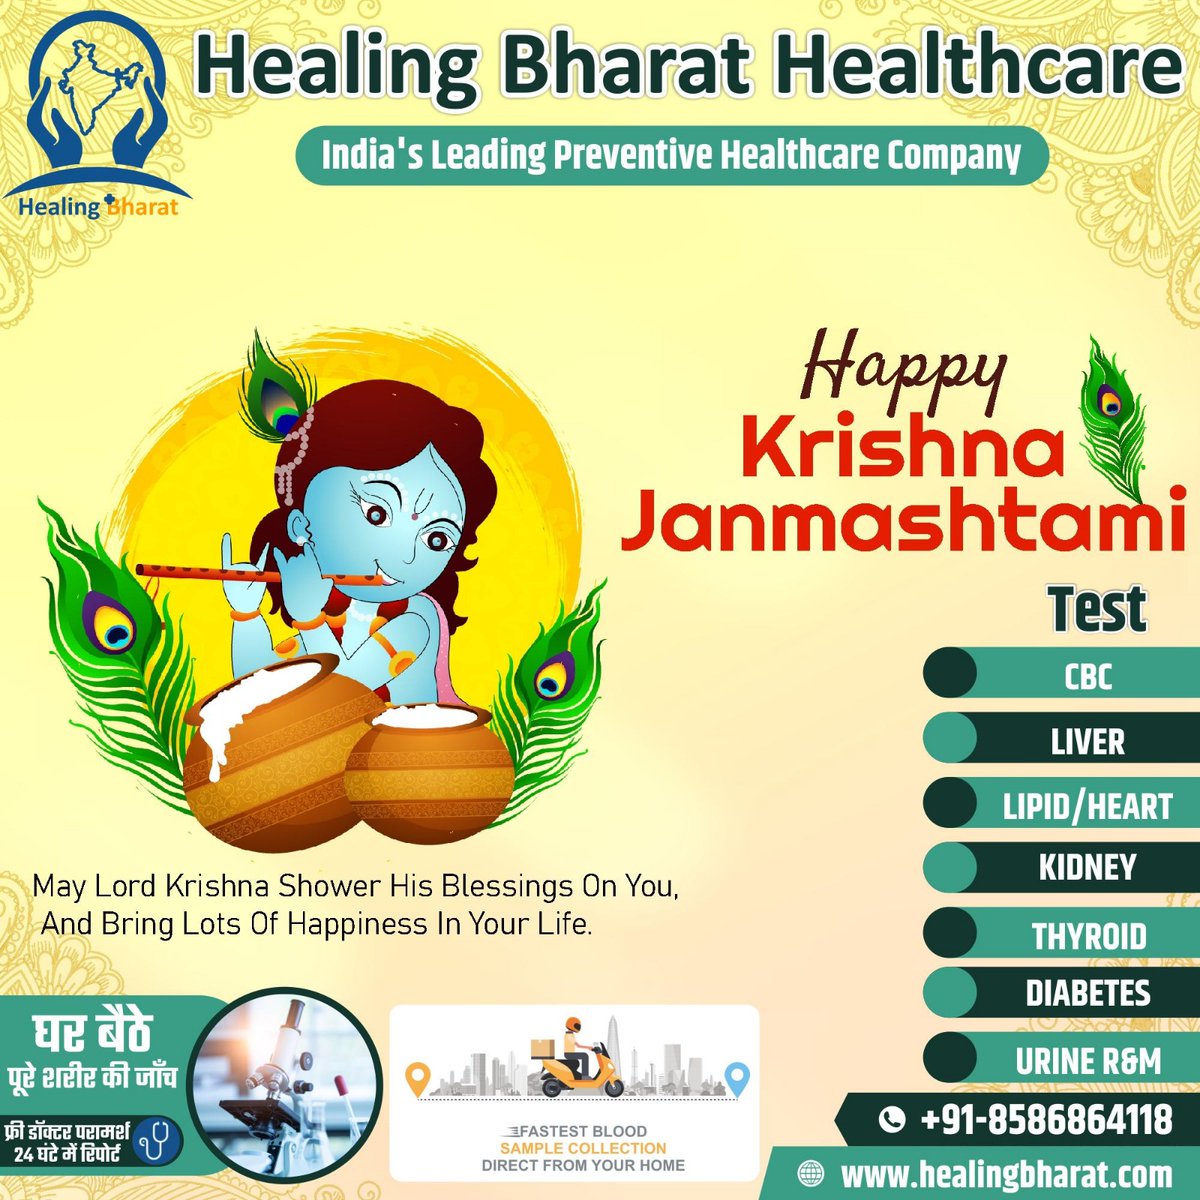 May the love and light of Lord Krishna guide you through life and enlighten your homes with happiness. @HealingBharat wishes everyone a very 𝐇𝐚𝐩𝐩𝐲 𝐉𝐚𝐧𝐦𝐚𝐬𝐡𝐭𝐚𝐦𝐢! #Janmashtami #KrishnaJanmashtami #HappyJanmashtami #HealingBharat